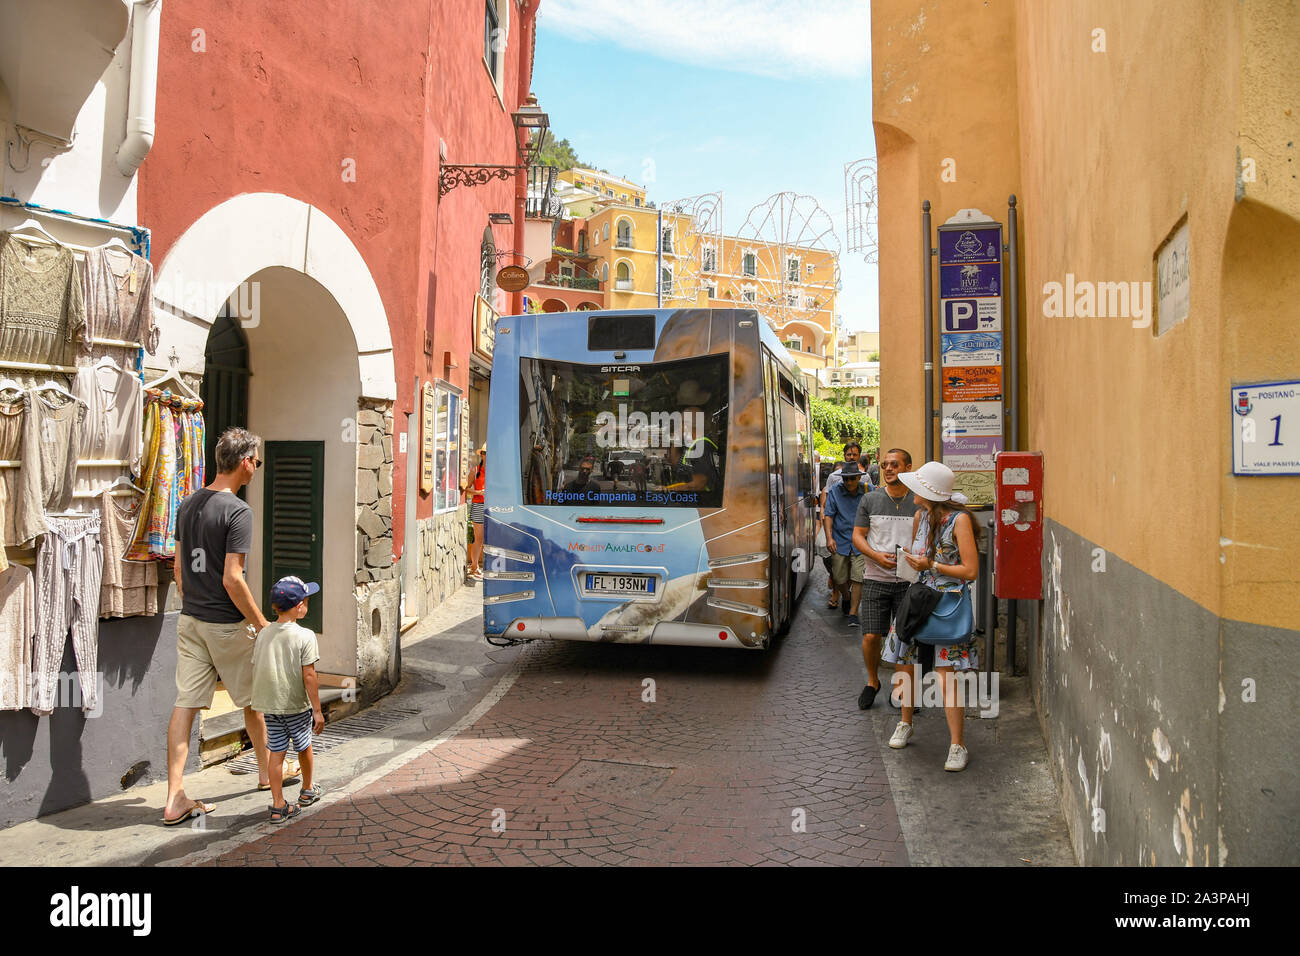 POSITANO, ITALY - AUGUST 2019: Bus full of people negotiating one of the narrow streets in the town of Positano on Italy's Amalfi Coast Stock Photo